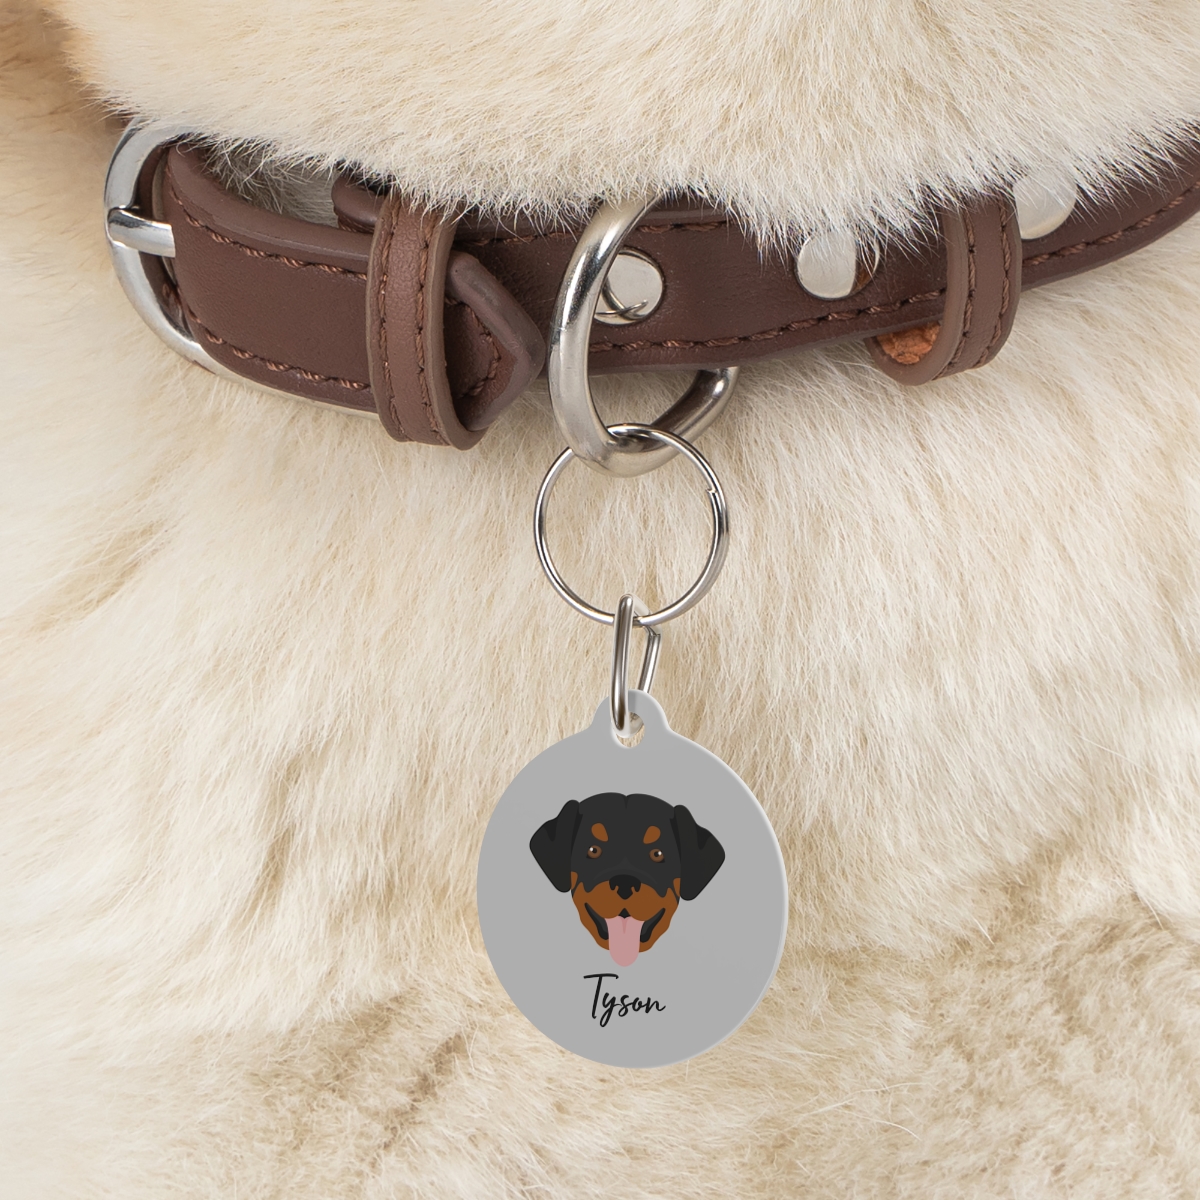 “rottweiler black tan” personalized pet tag